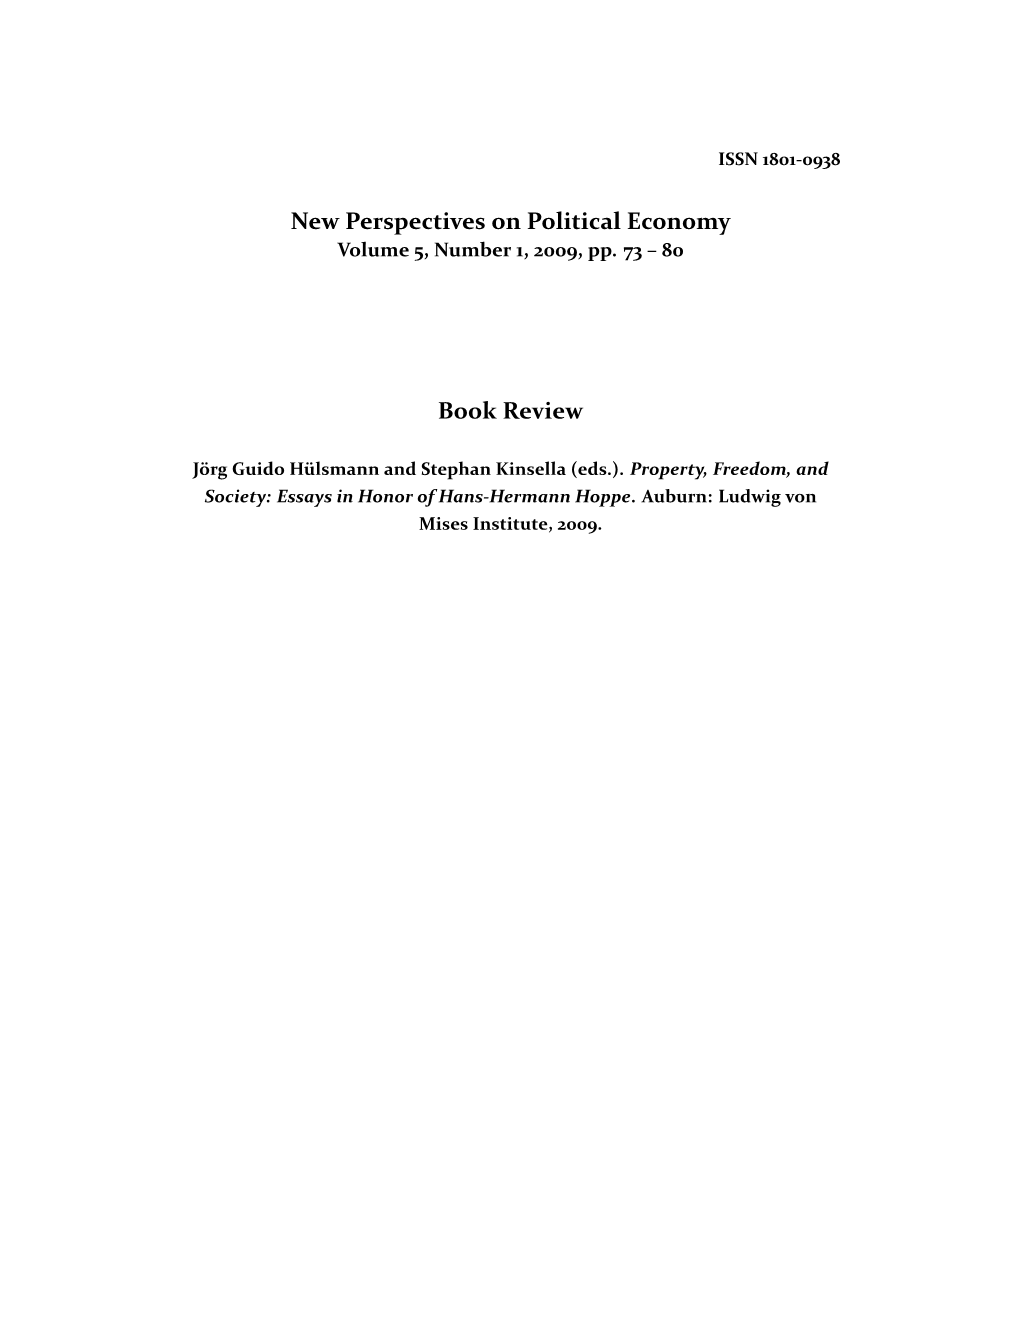 New Perspectives on Political Economy Book Review